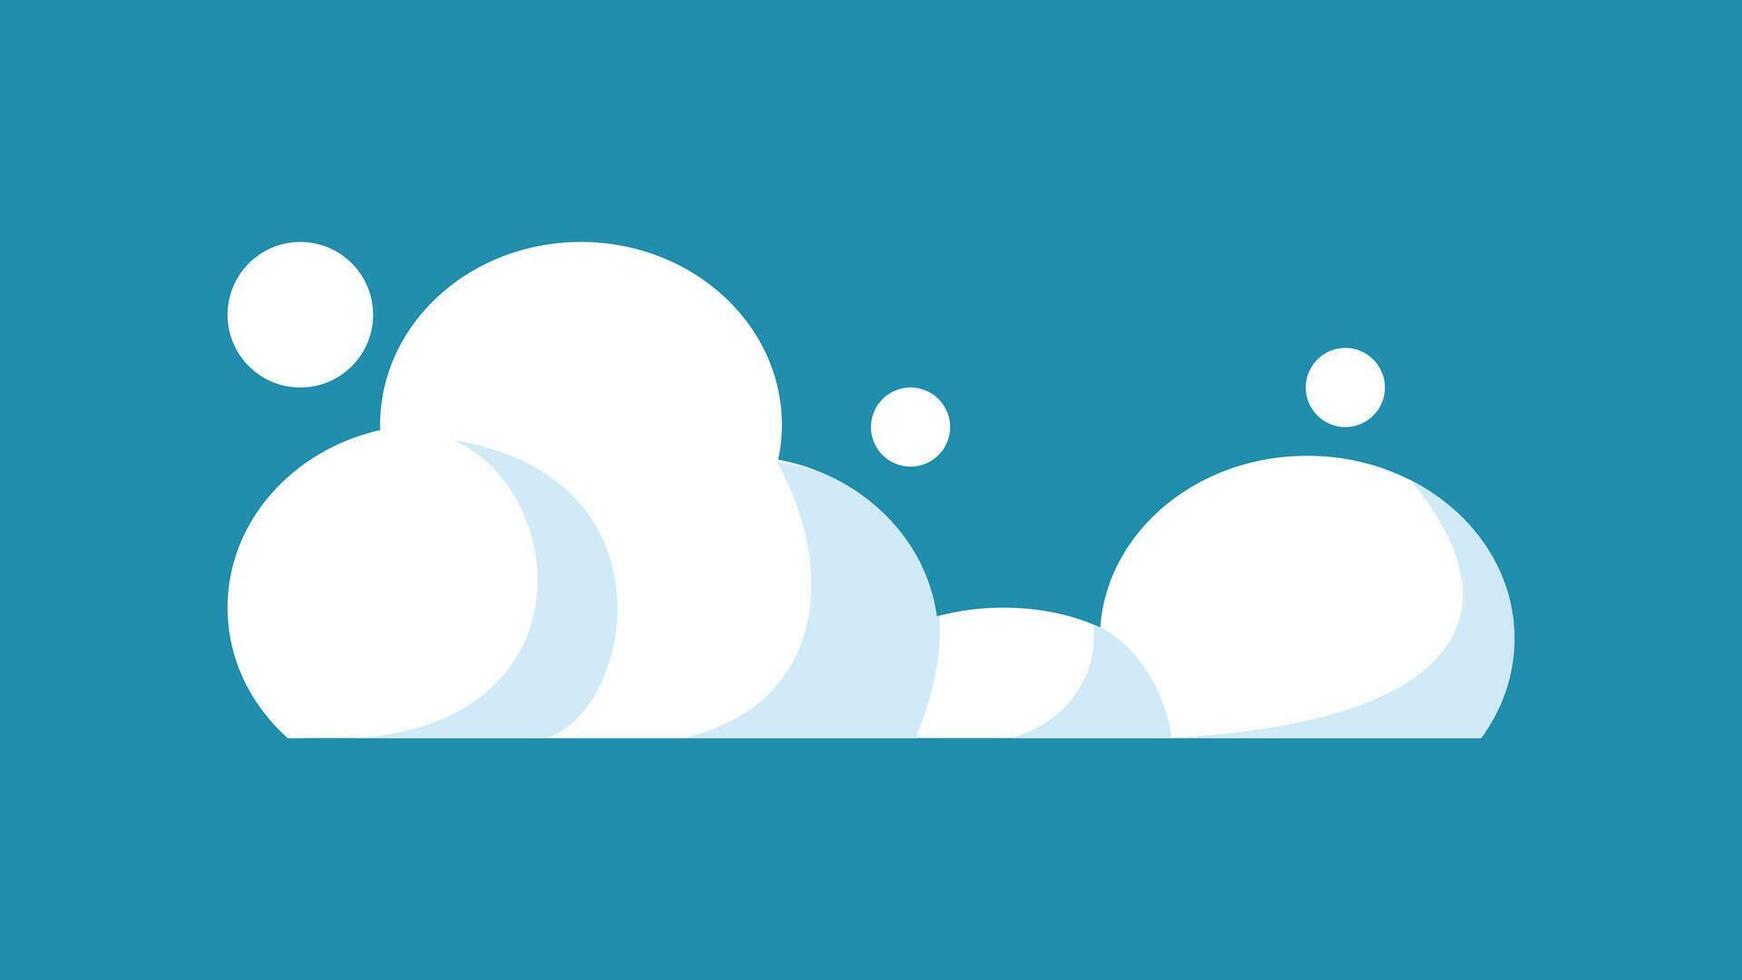 Cloud. Cloud icon isolated on background. vector